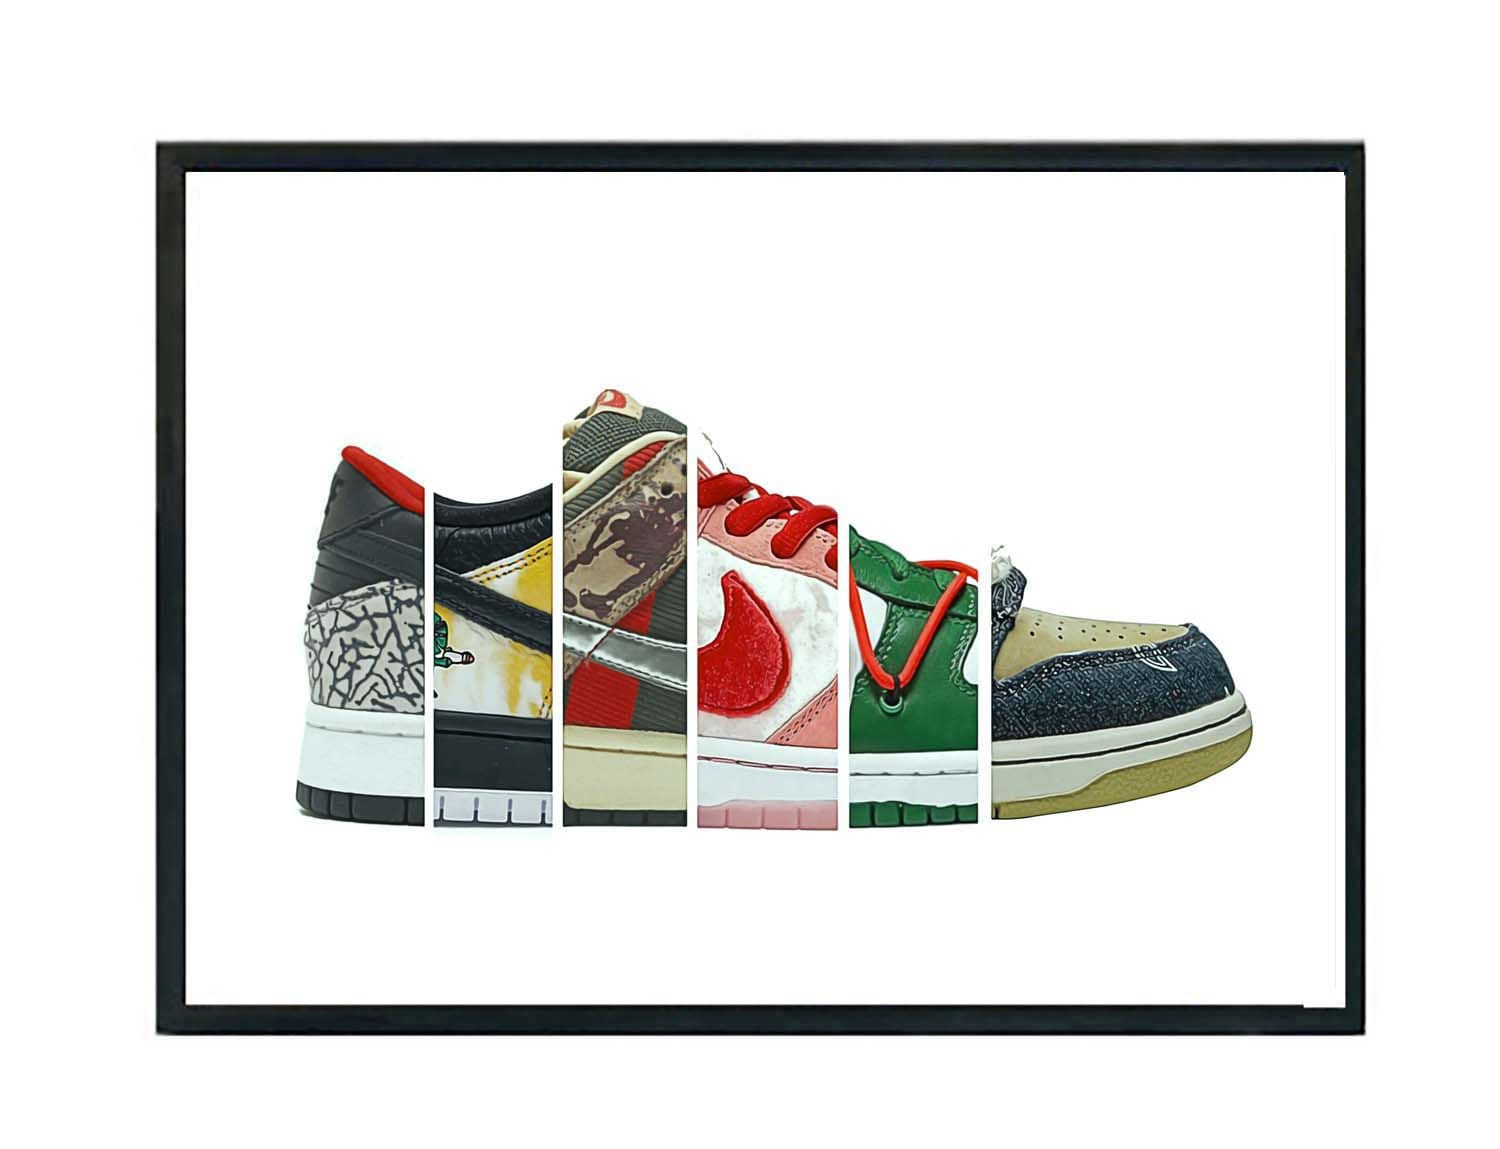 Sb Dunk History Poster Hypebeast Poster Sneaker Collage Poster Urban